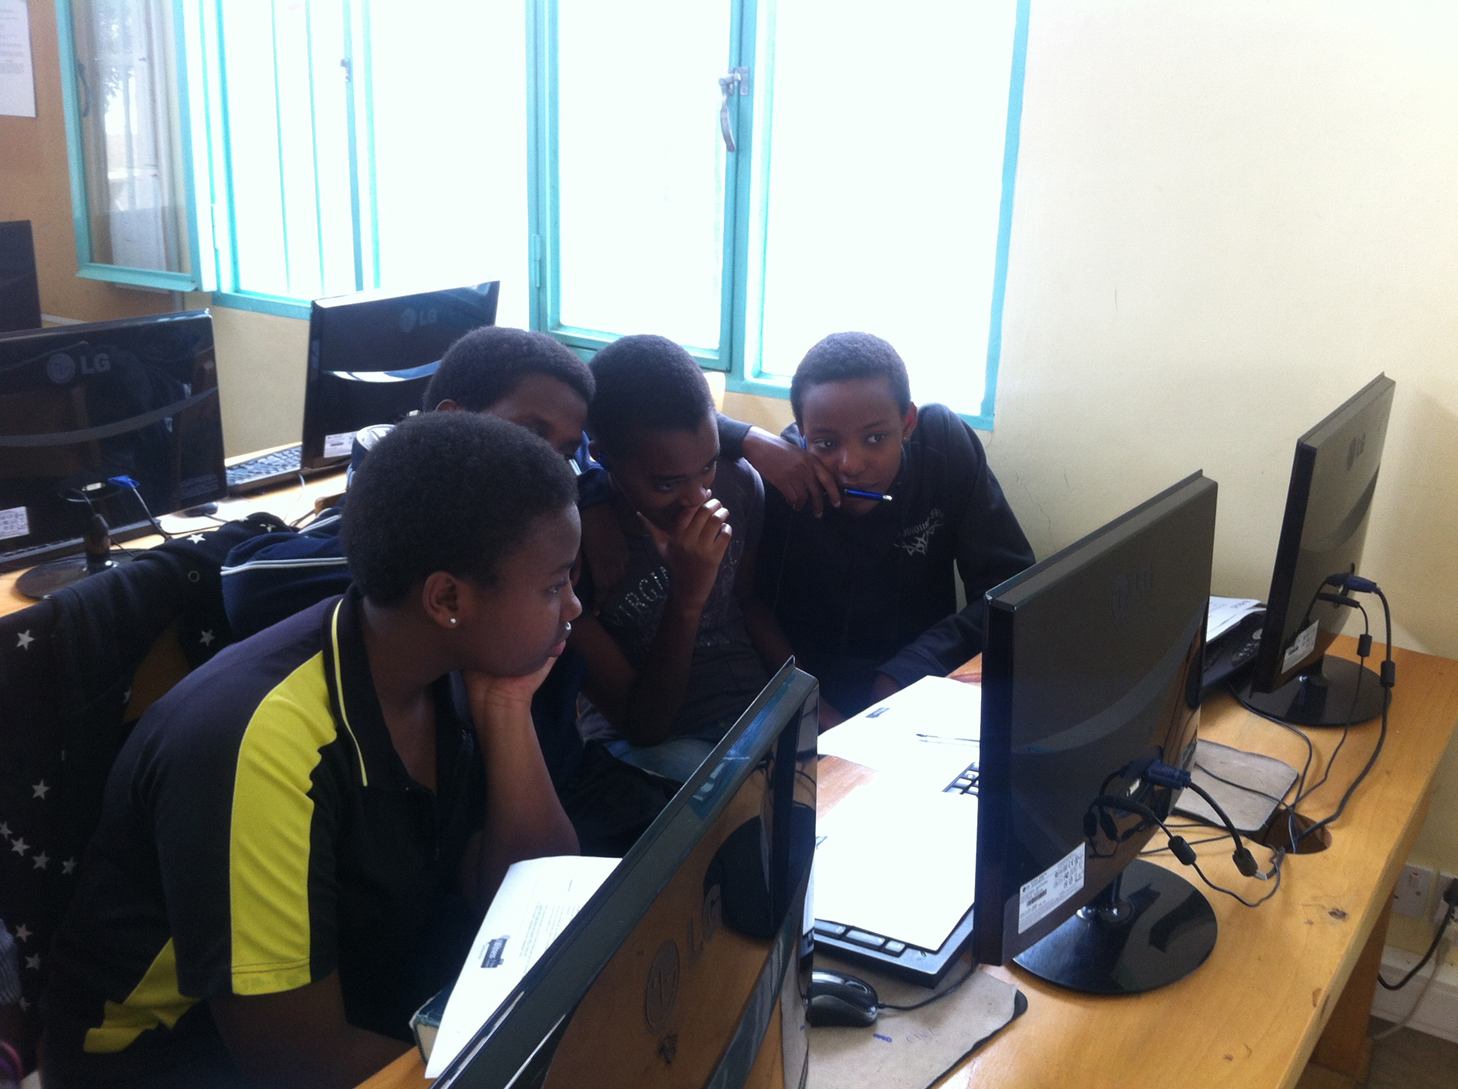 Students in Rwanda piloted IWitness in their classrooms.